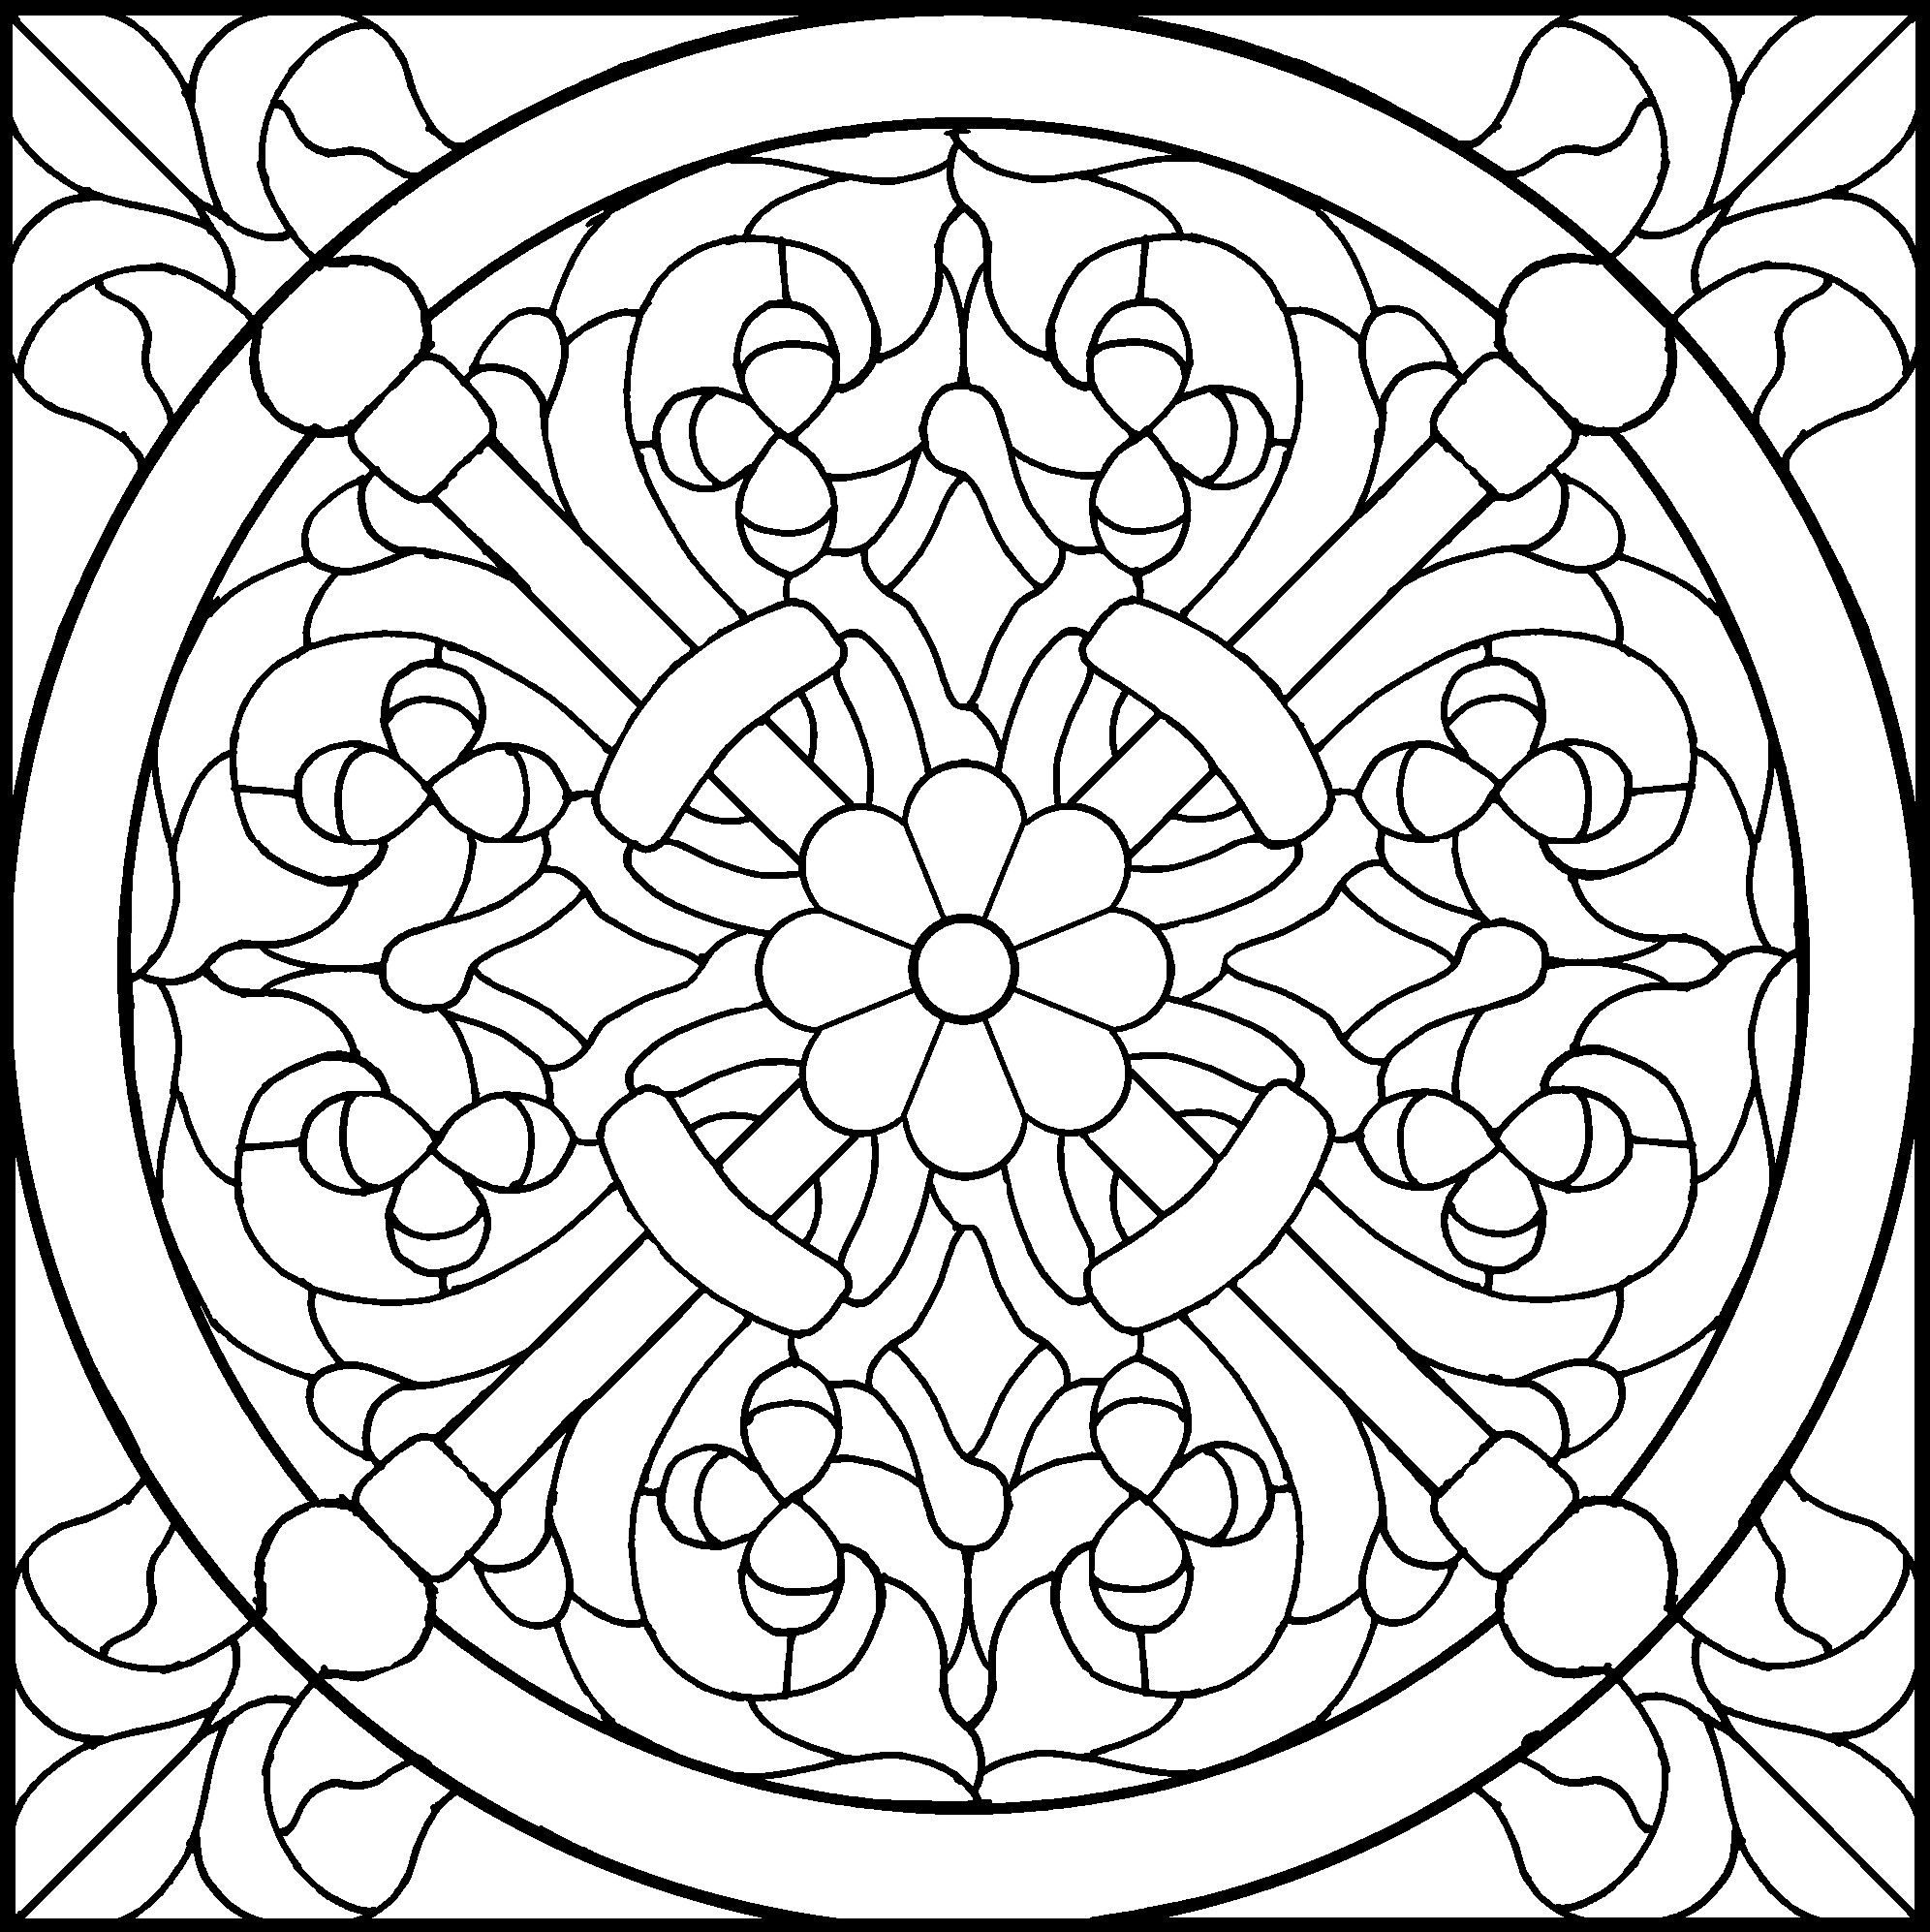 45 Simple Stained Glass Patterns | Guide Patterns - Free Printable Religious Stained Glass Patterns